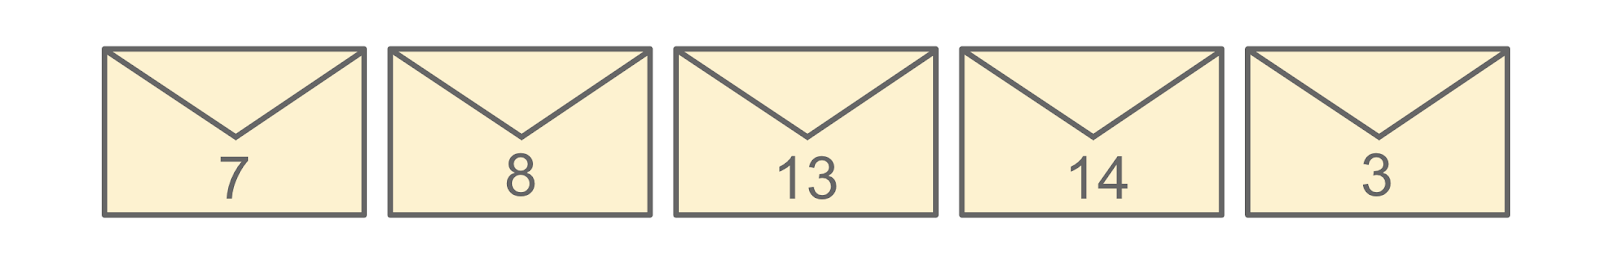 A graphic of envelopes with the following numbers written on them: 7, 8, 13, 14, and 3.